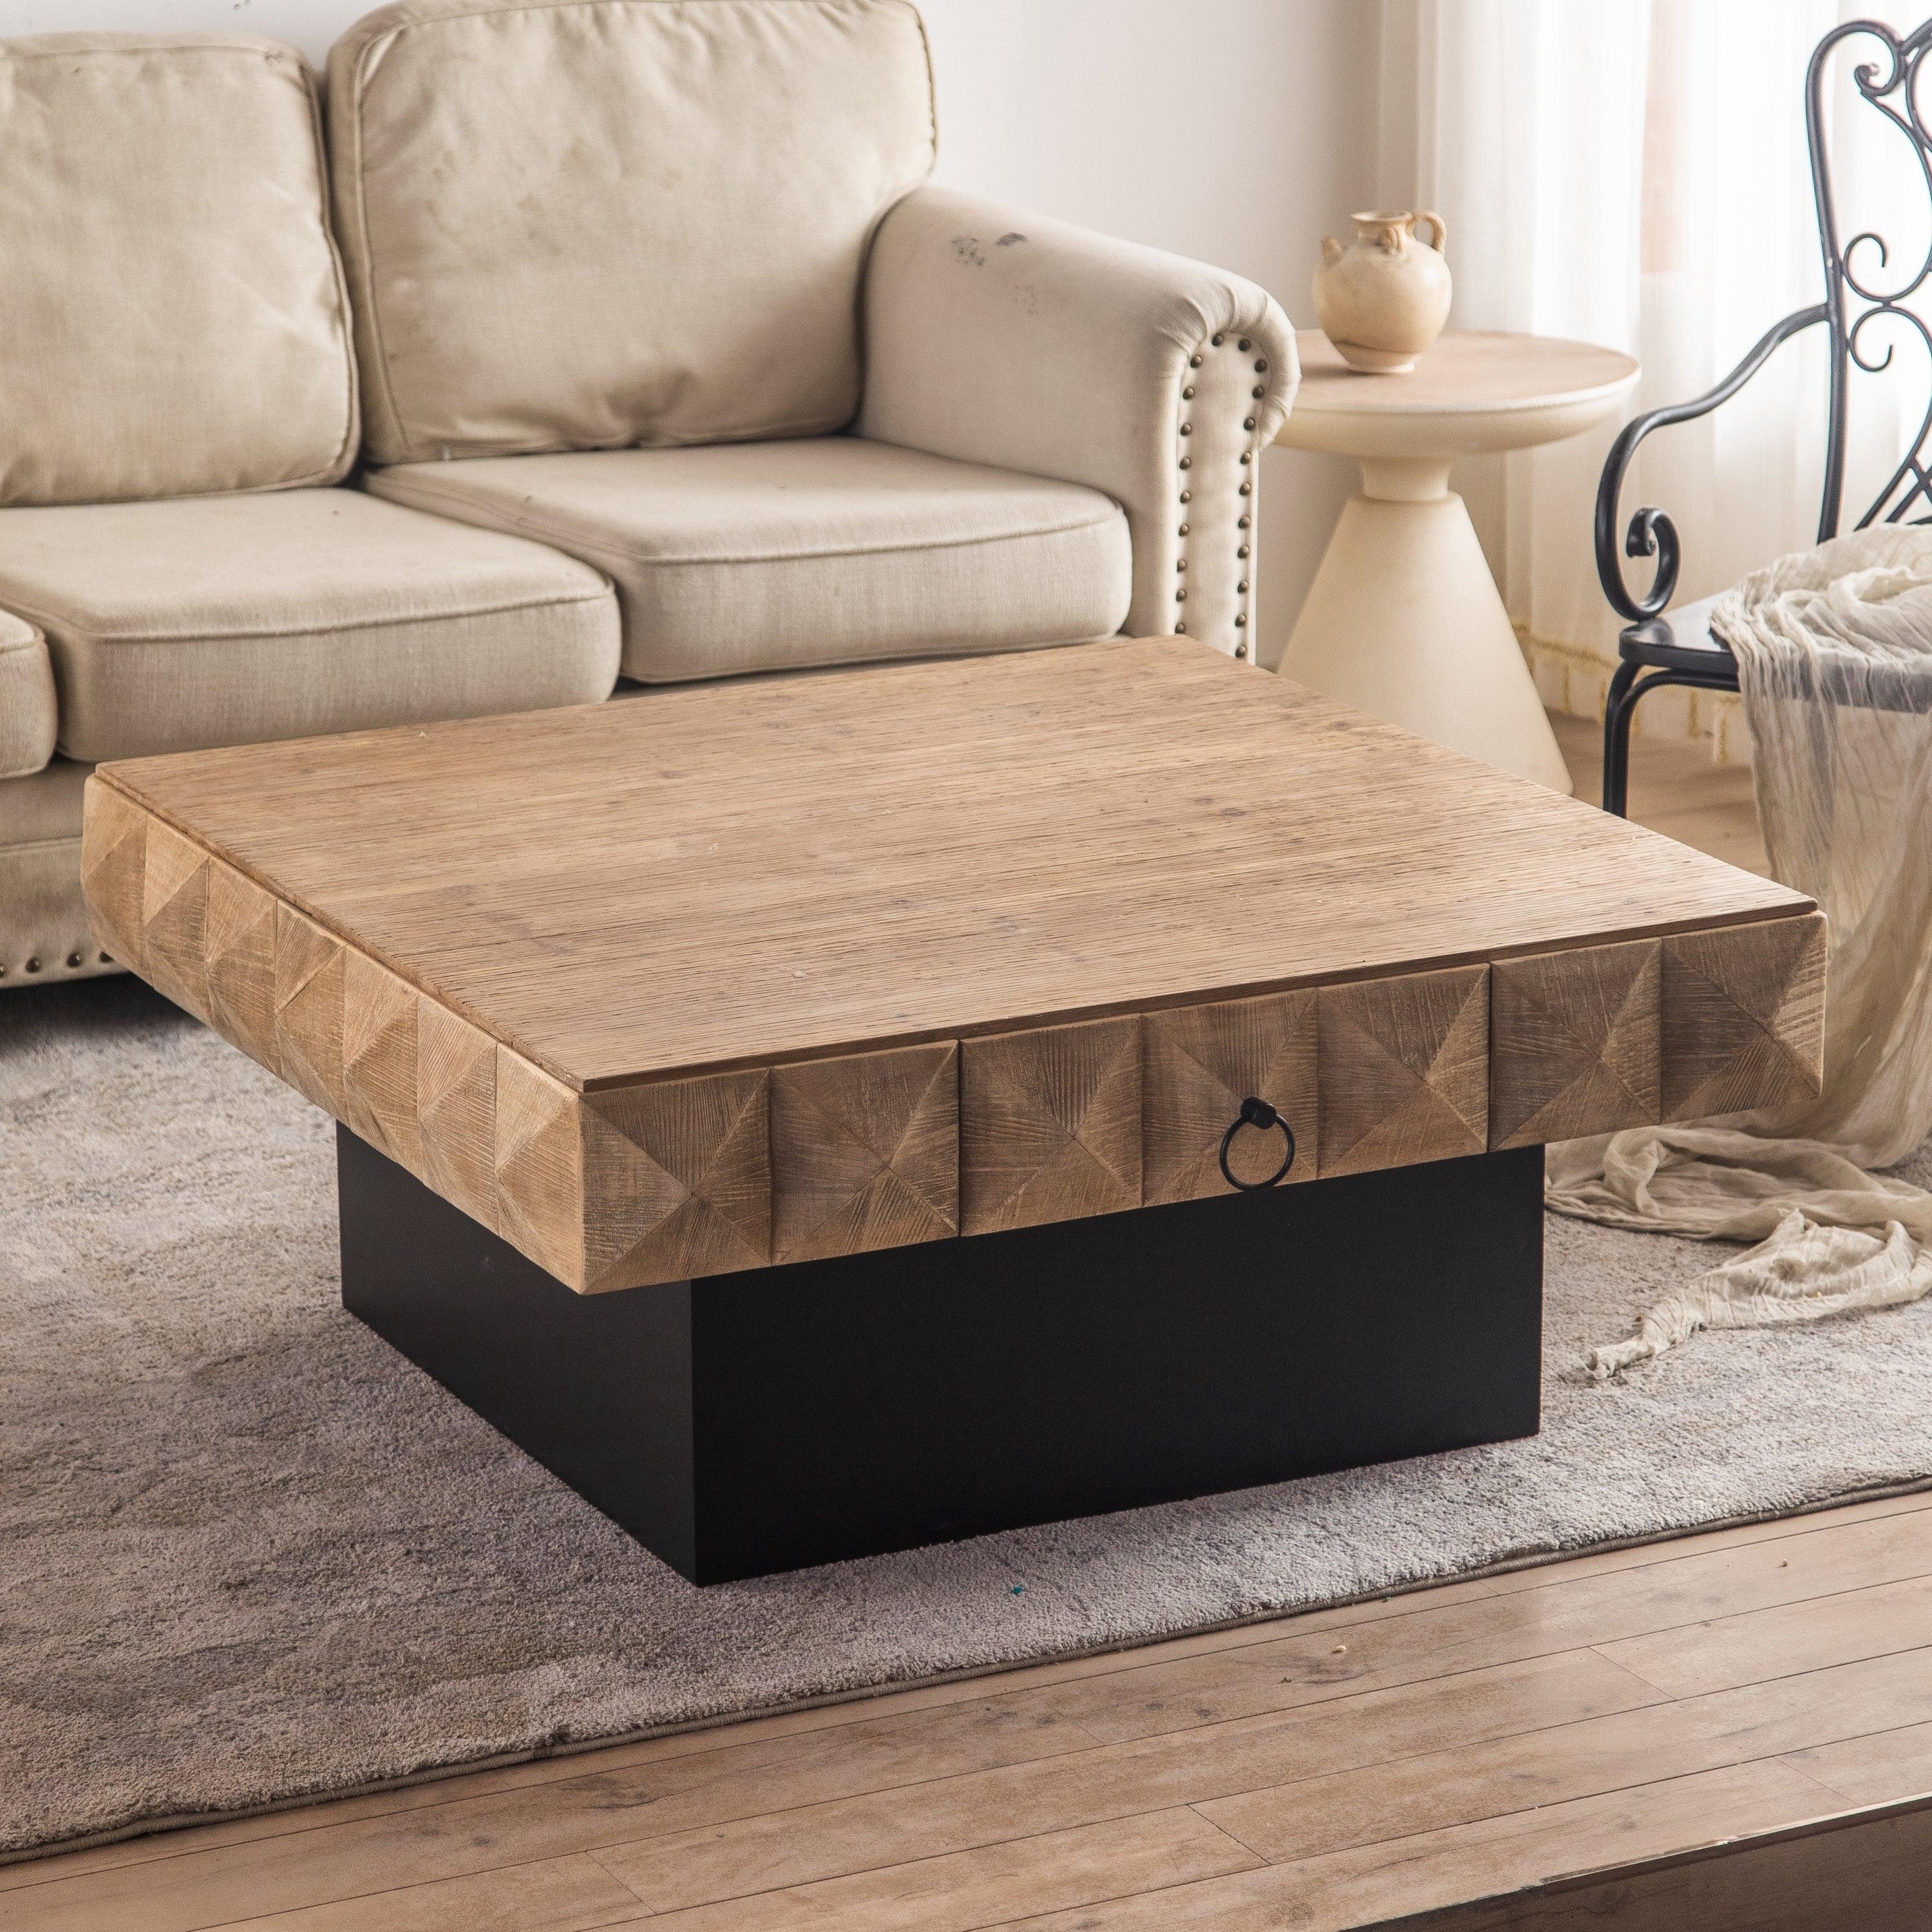 41.73" Three-dimensional Embossed  Pattern Square Retro Coffee Table with 2 Drawers and MDF Base